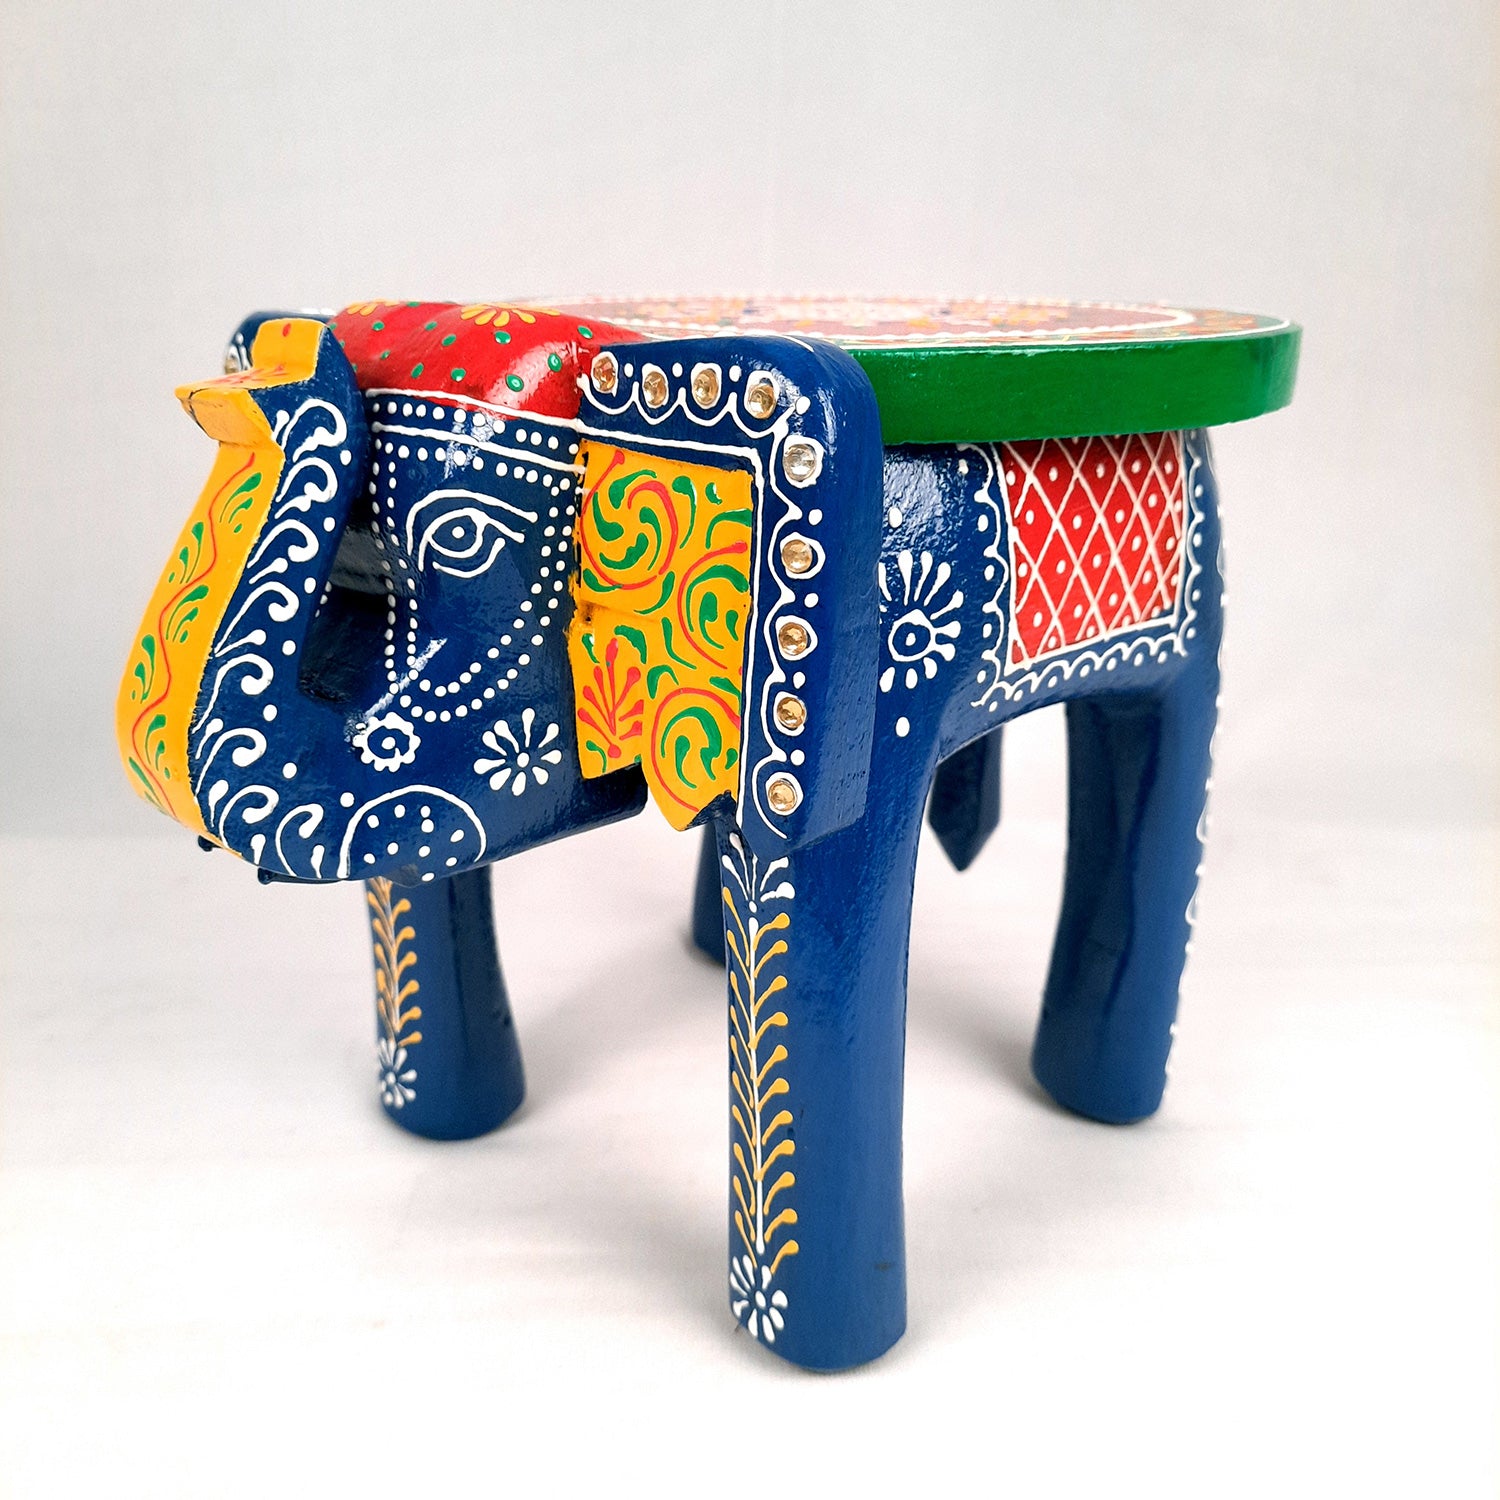 Elephant Table Showpiece | Animal Figurines - For Home, Living Room Decor & Gifts | Small Wood Stool - For Placing Small Pots & Showpieces - 8 Inch - apkamart #Color_Dark Blue